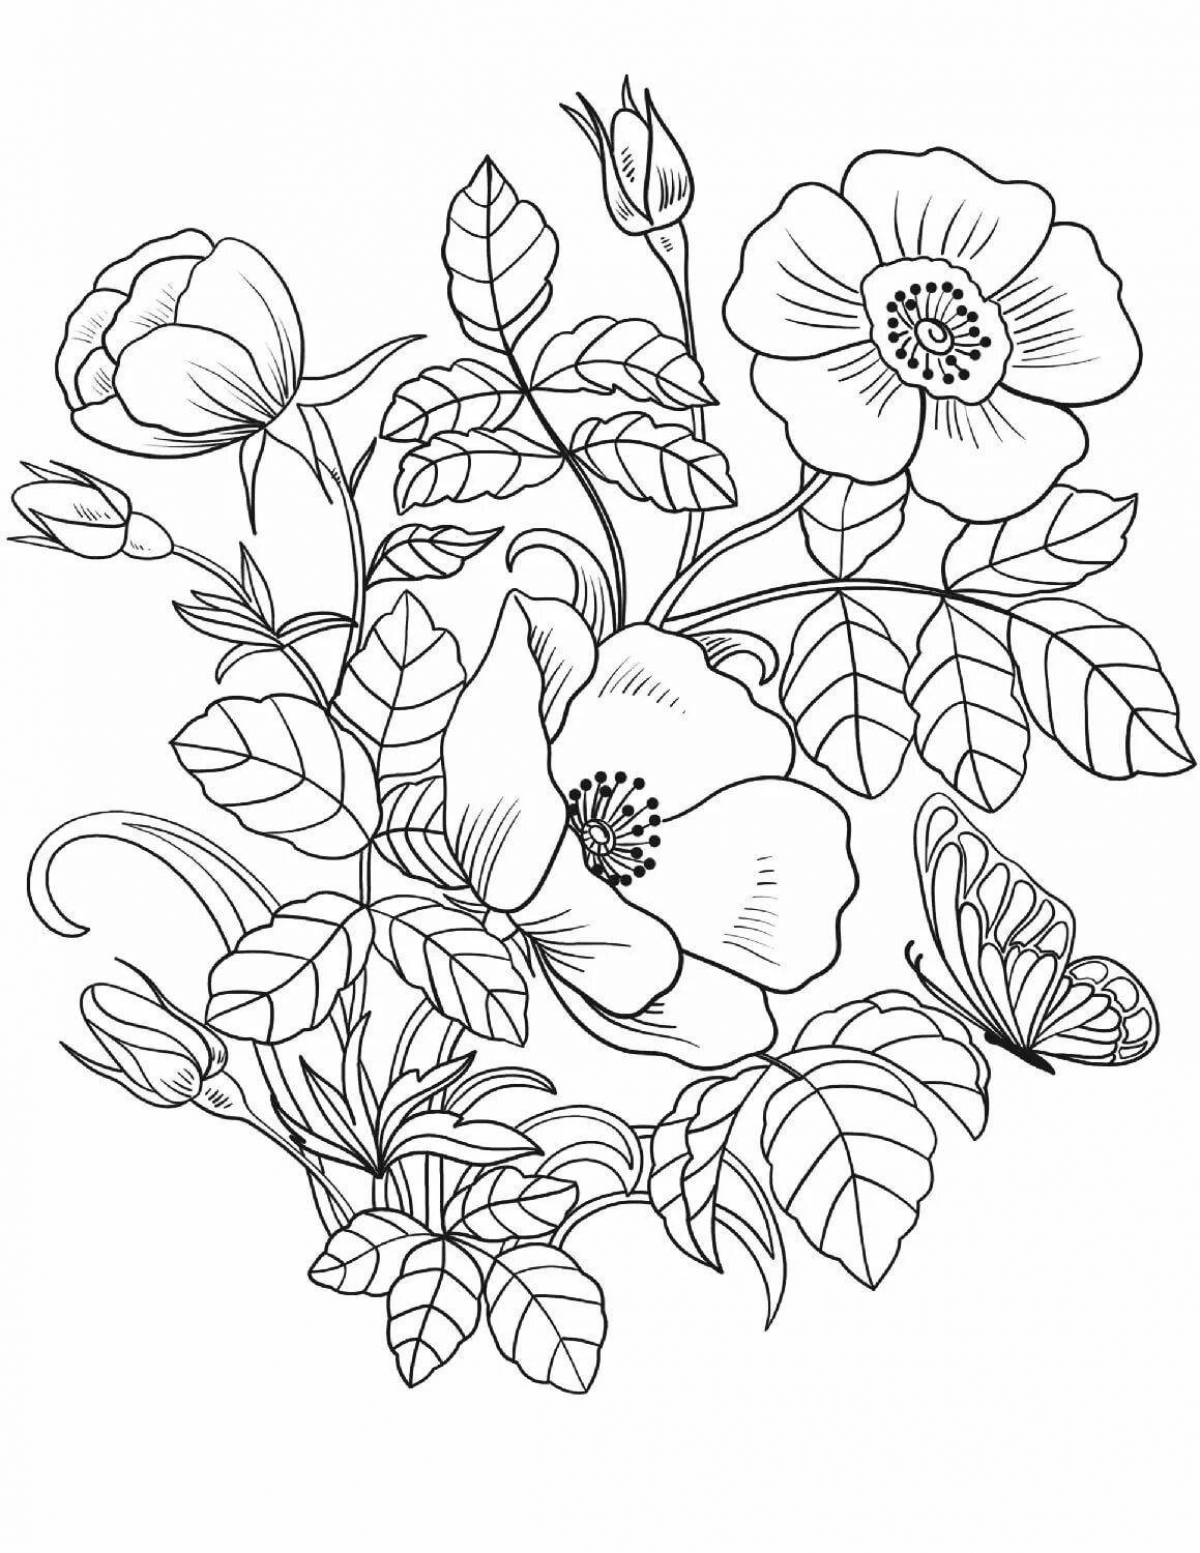 Gorgeous flowers coloring pages